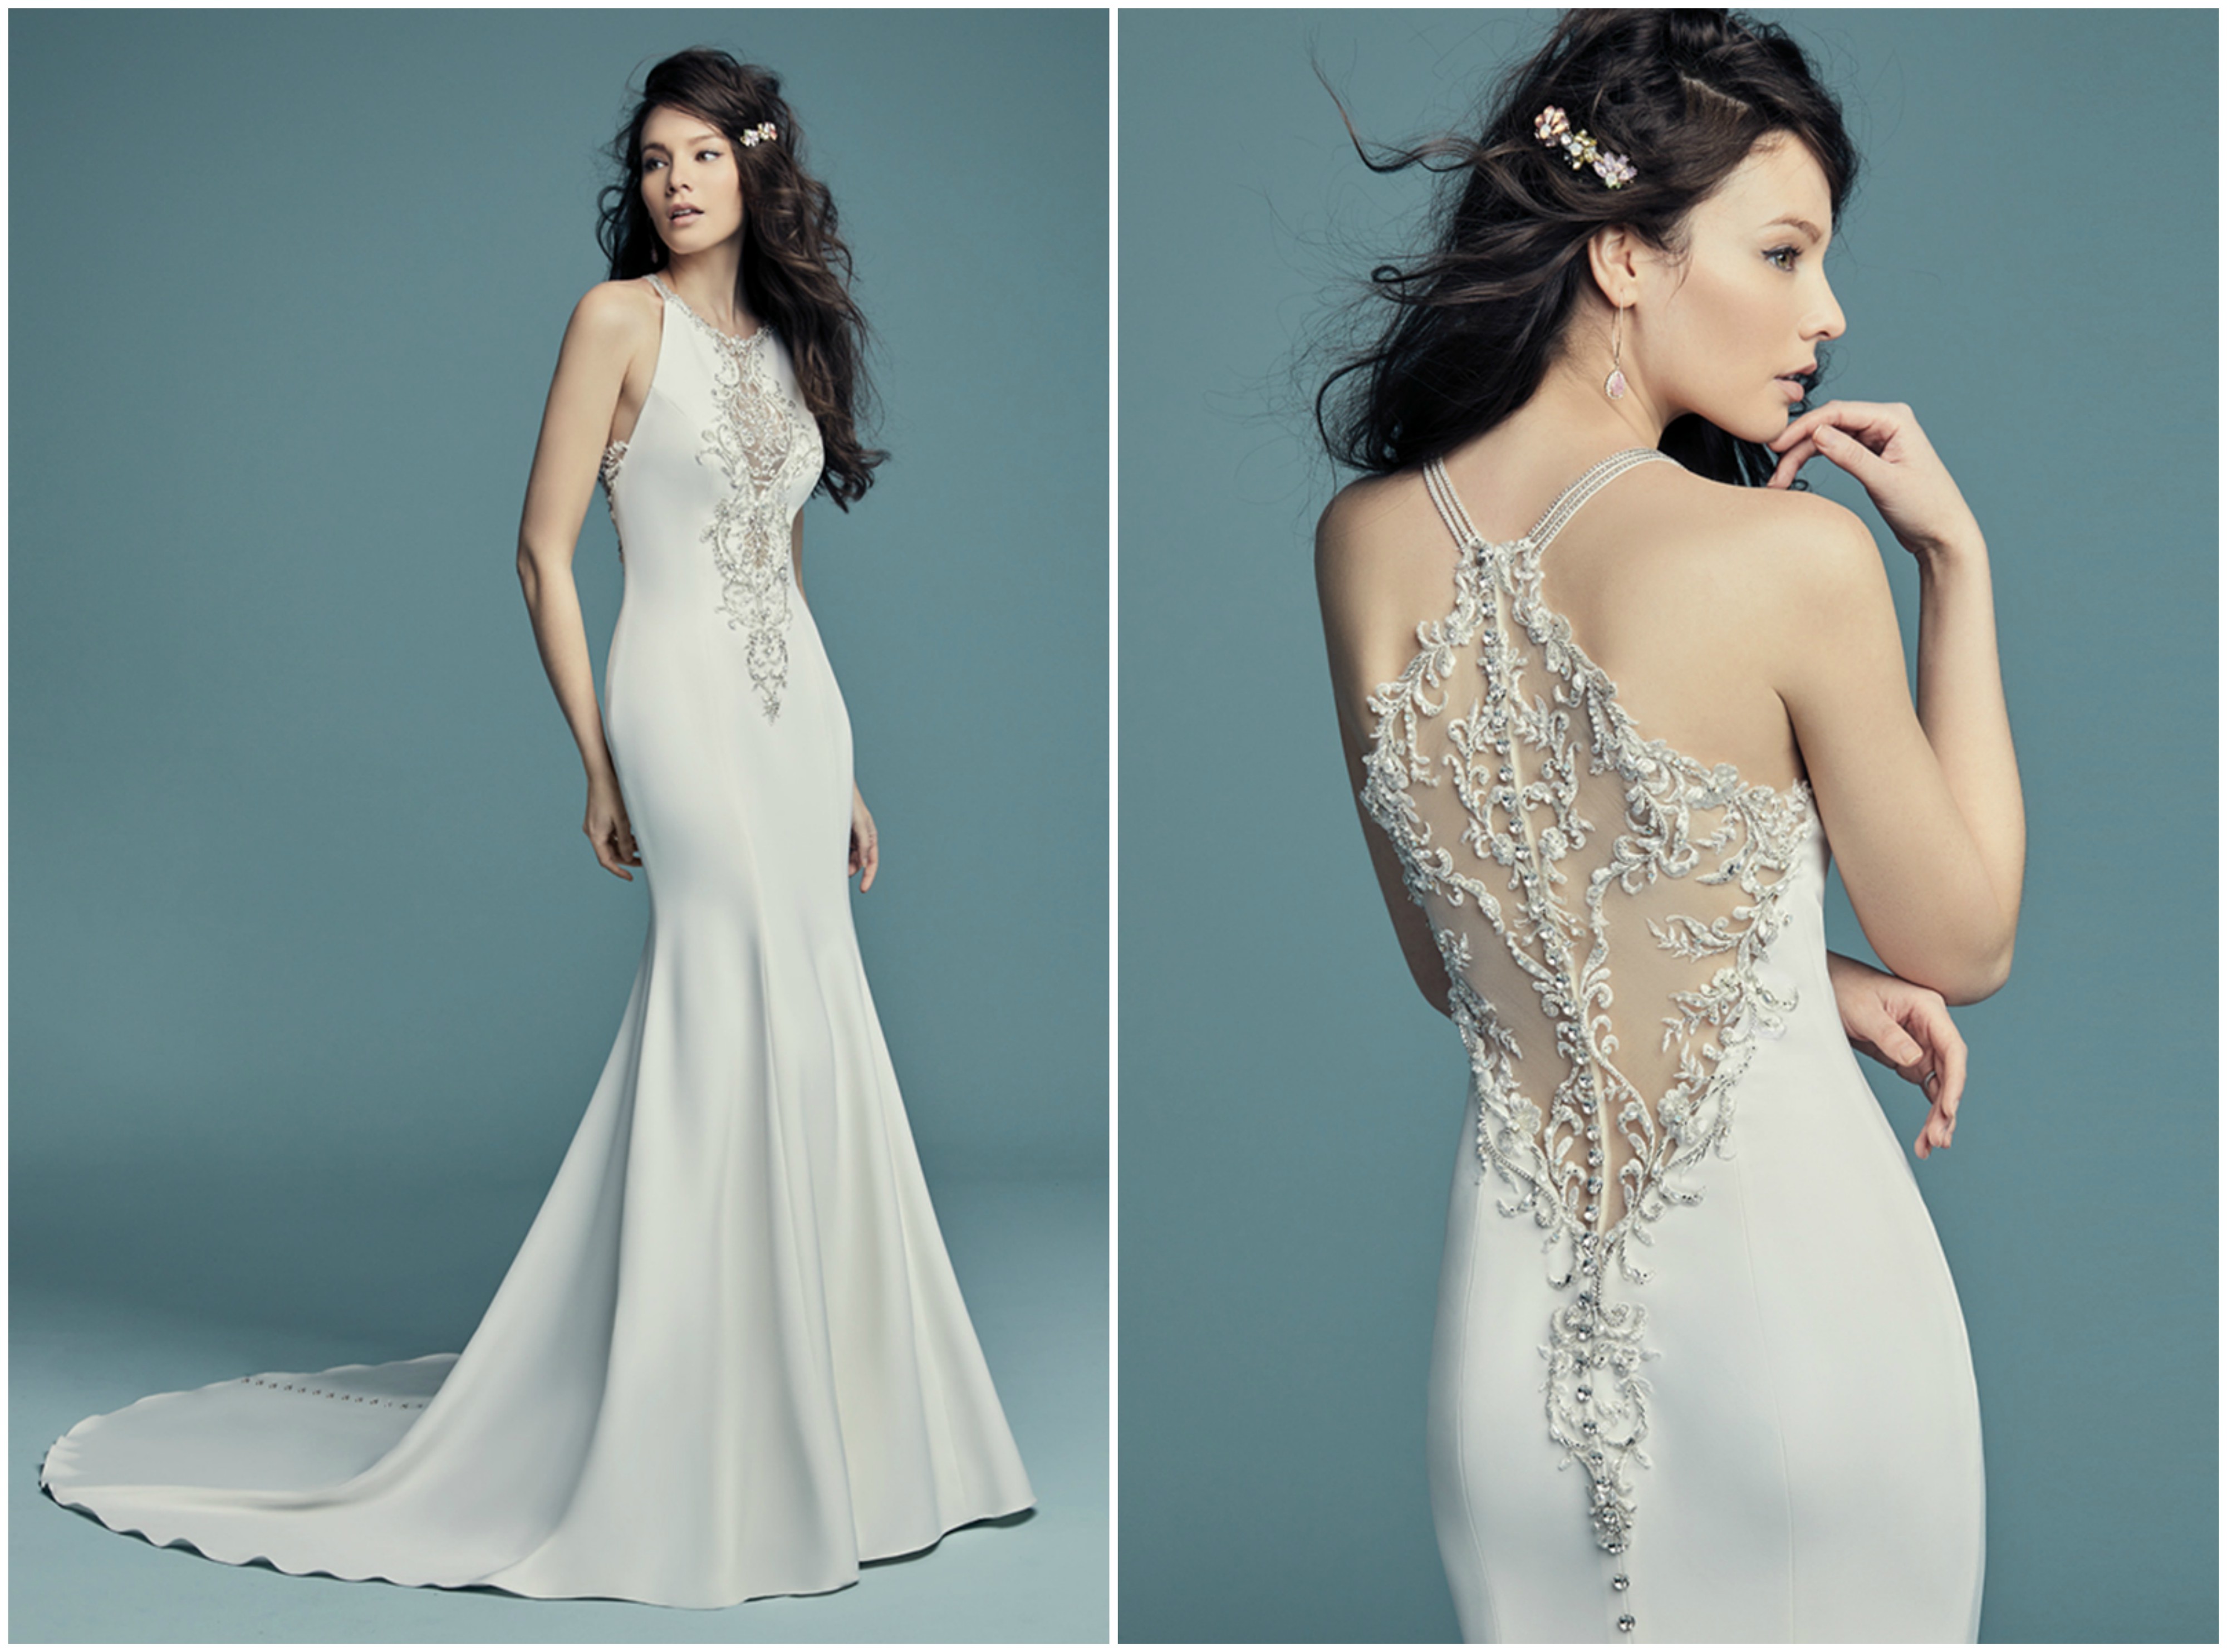 <a href="https://www.maggiesottero.com/maggie-sottero/maurelle/11496" target="_blank">Maggie Sottero</a>